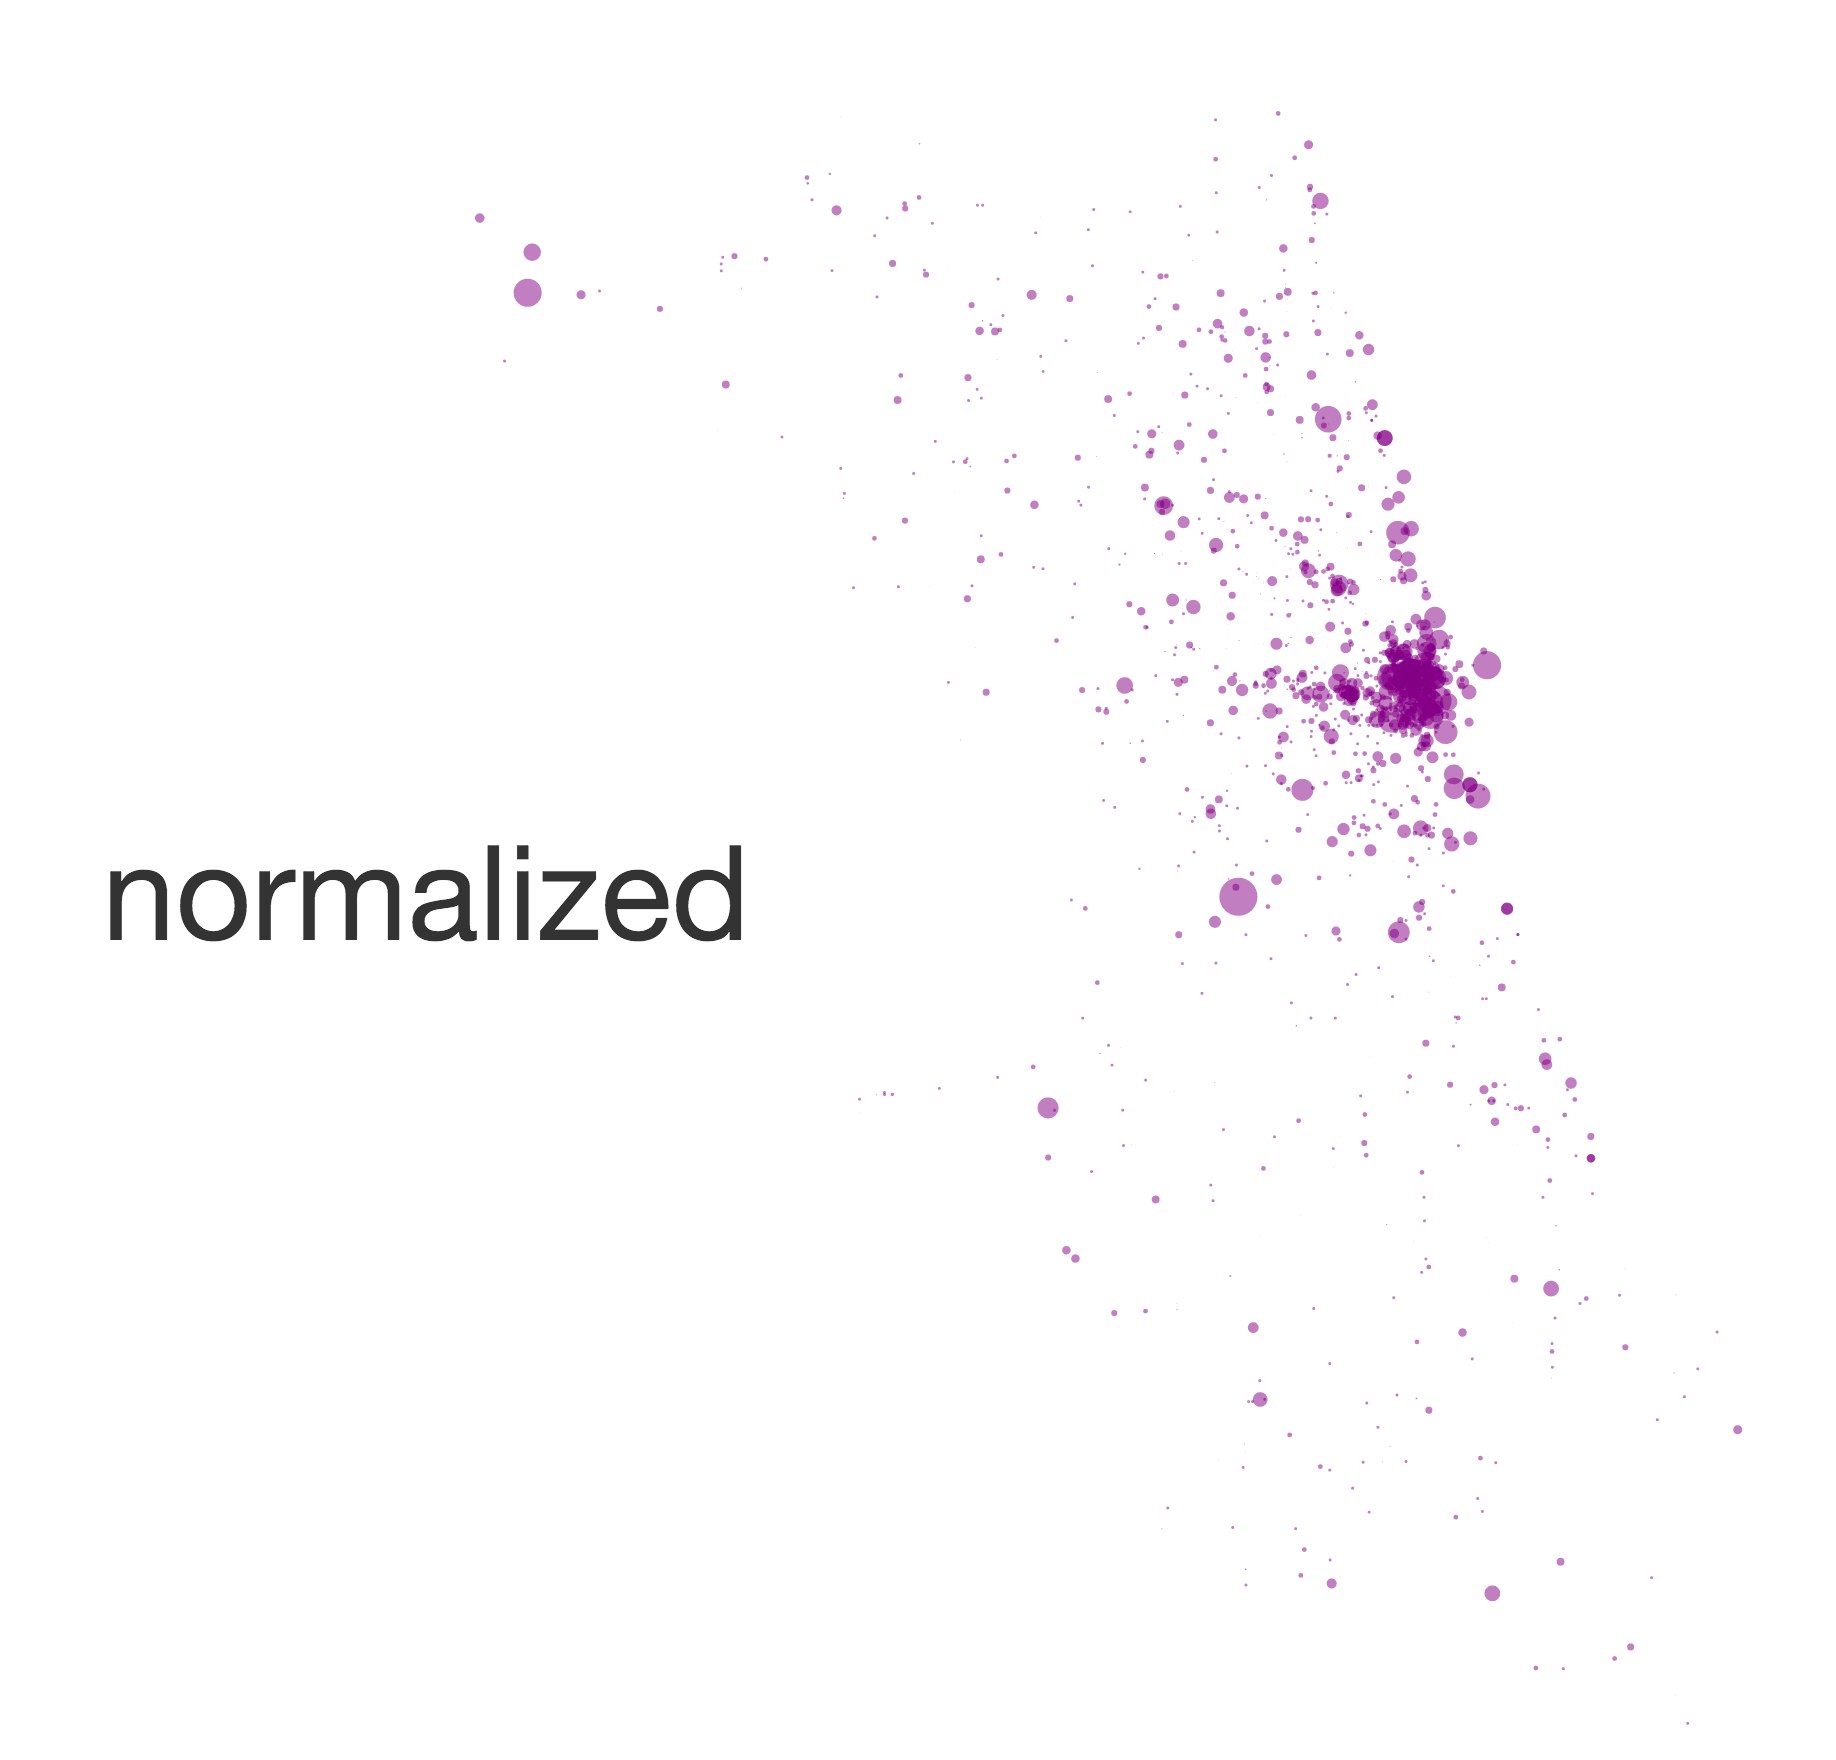 Normalized Instagram Presence Without Borders